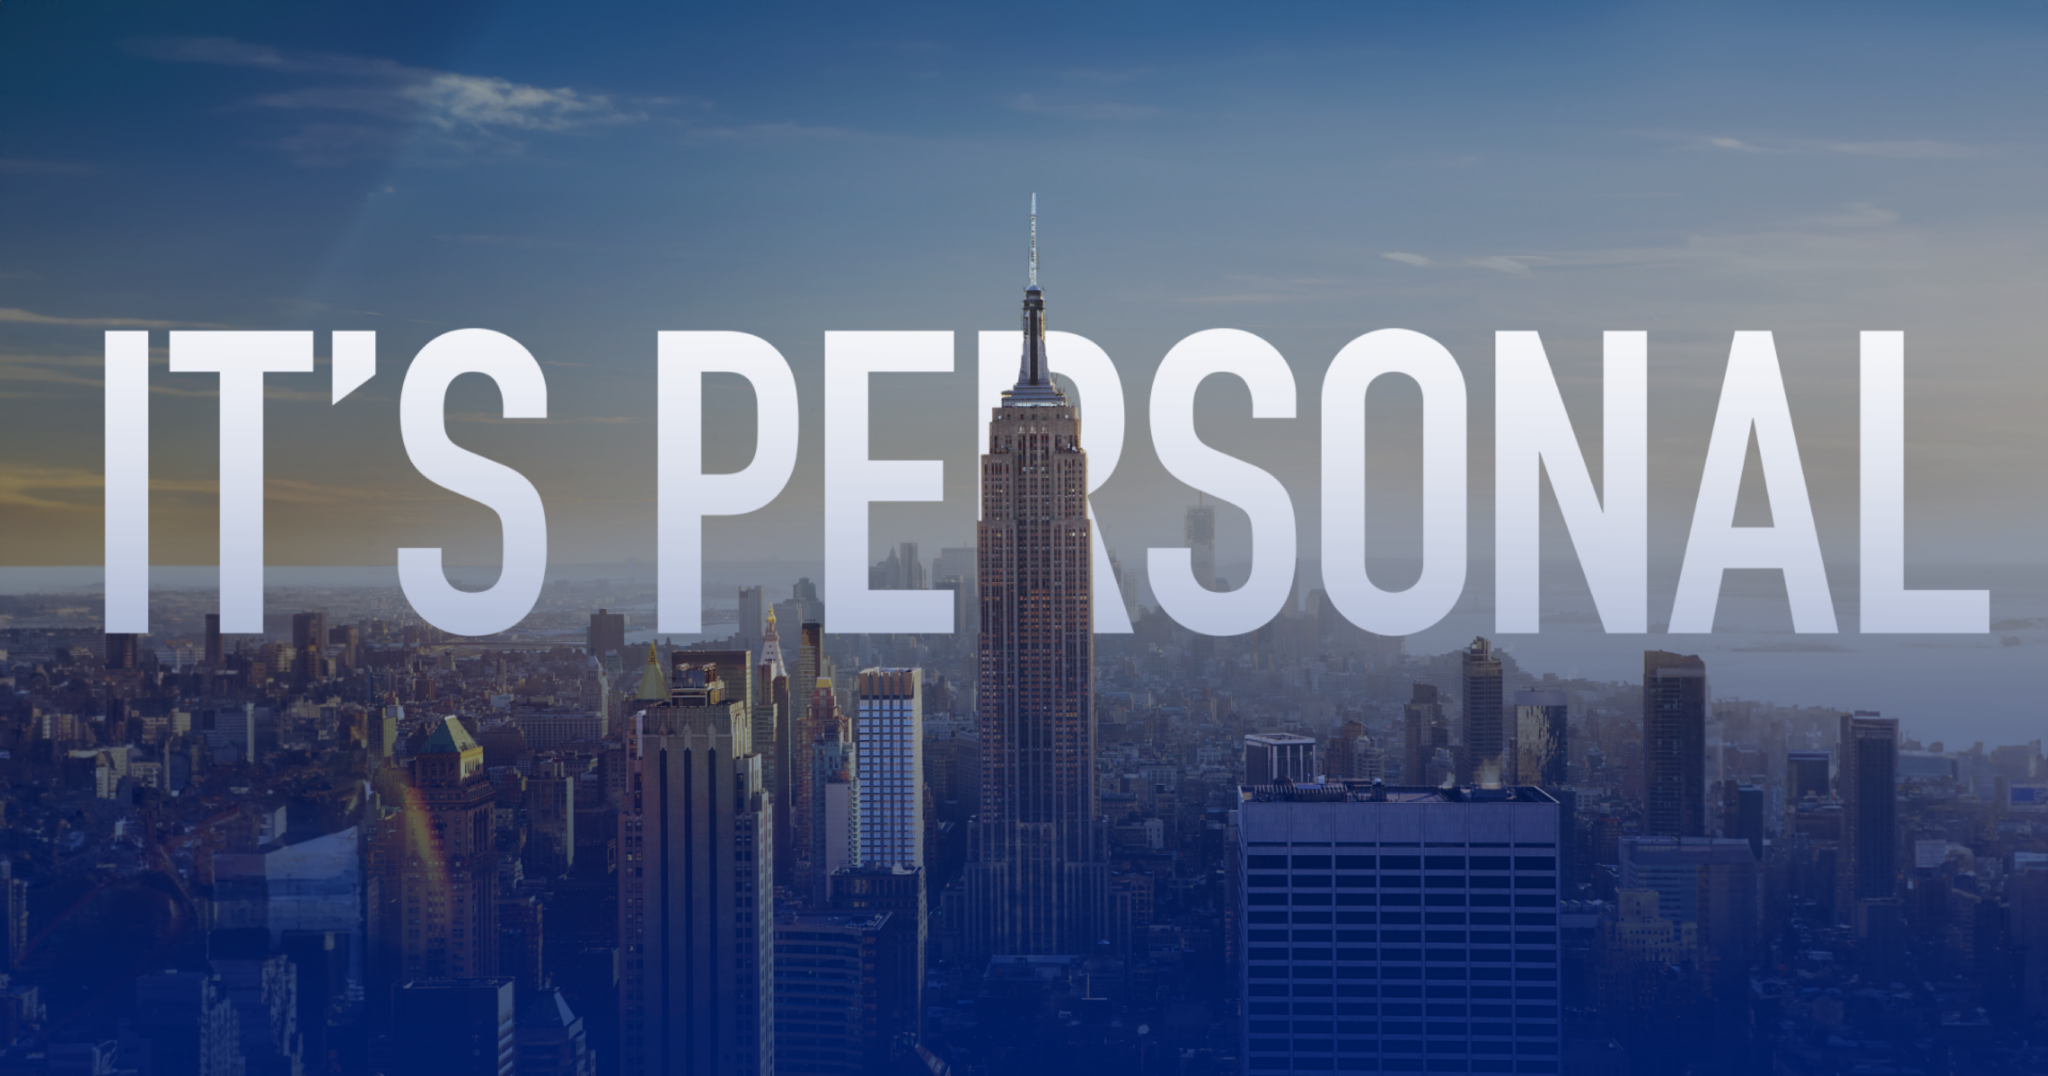 This image shows evening city skyline view with "ITS PERSONAL" written across it.